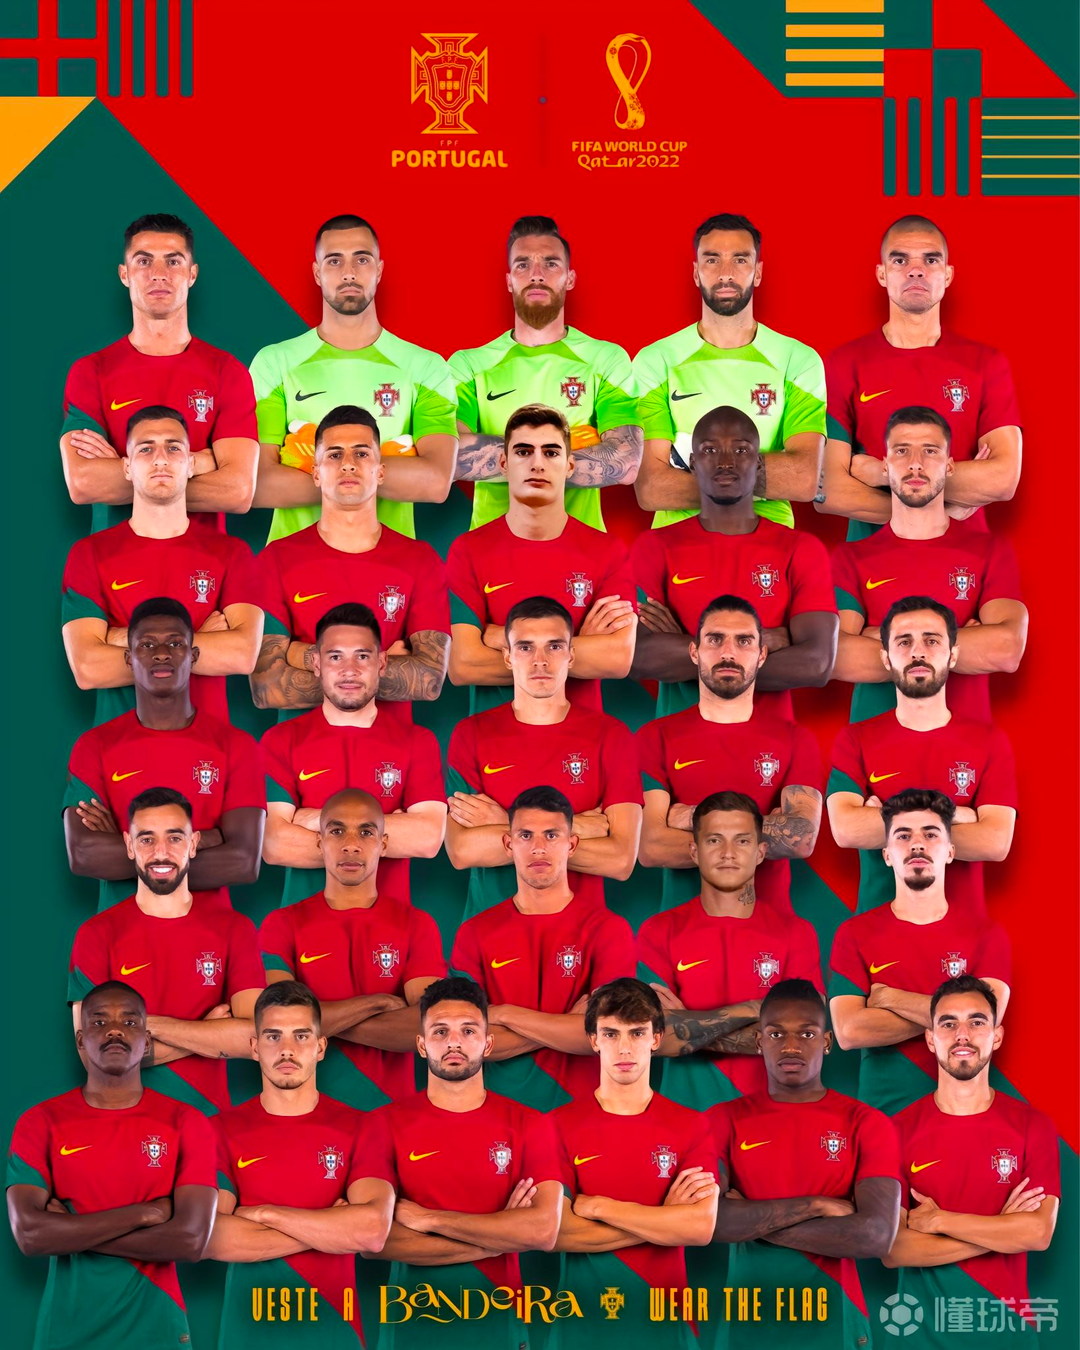 CR: Once again ready to hold Portugal's name high, go Portugal